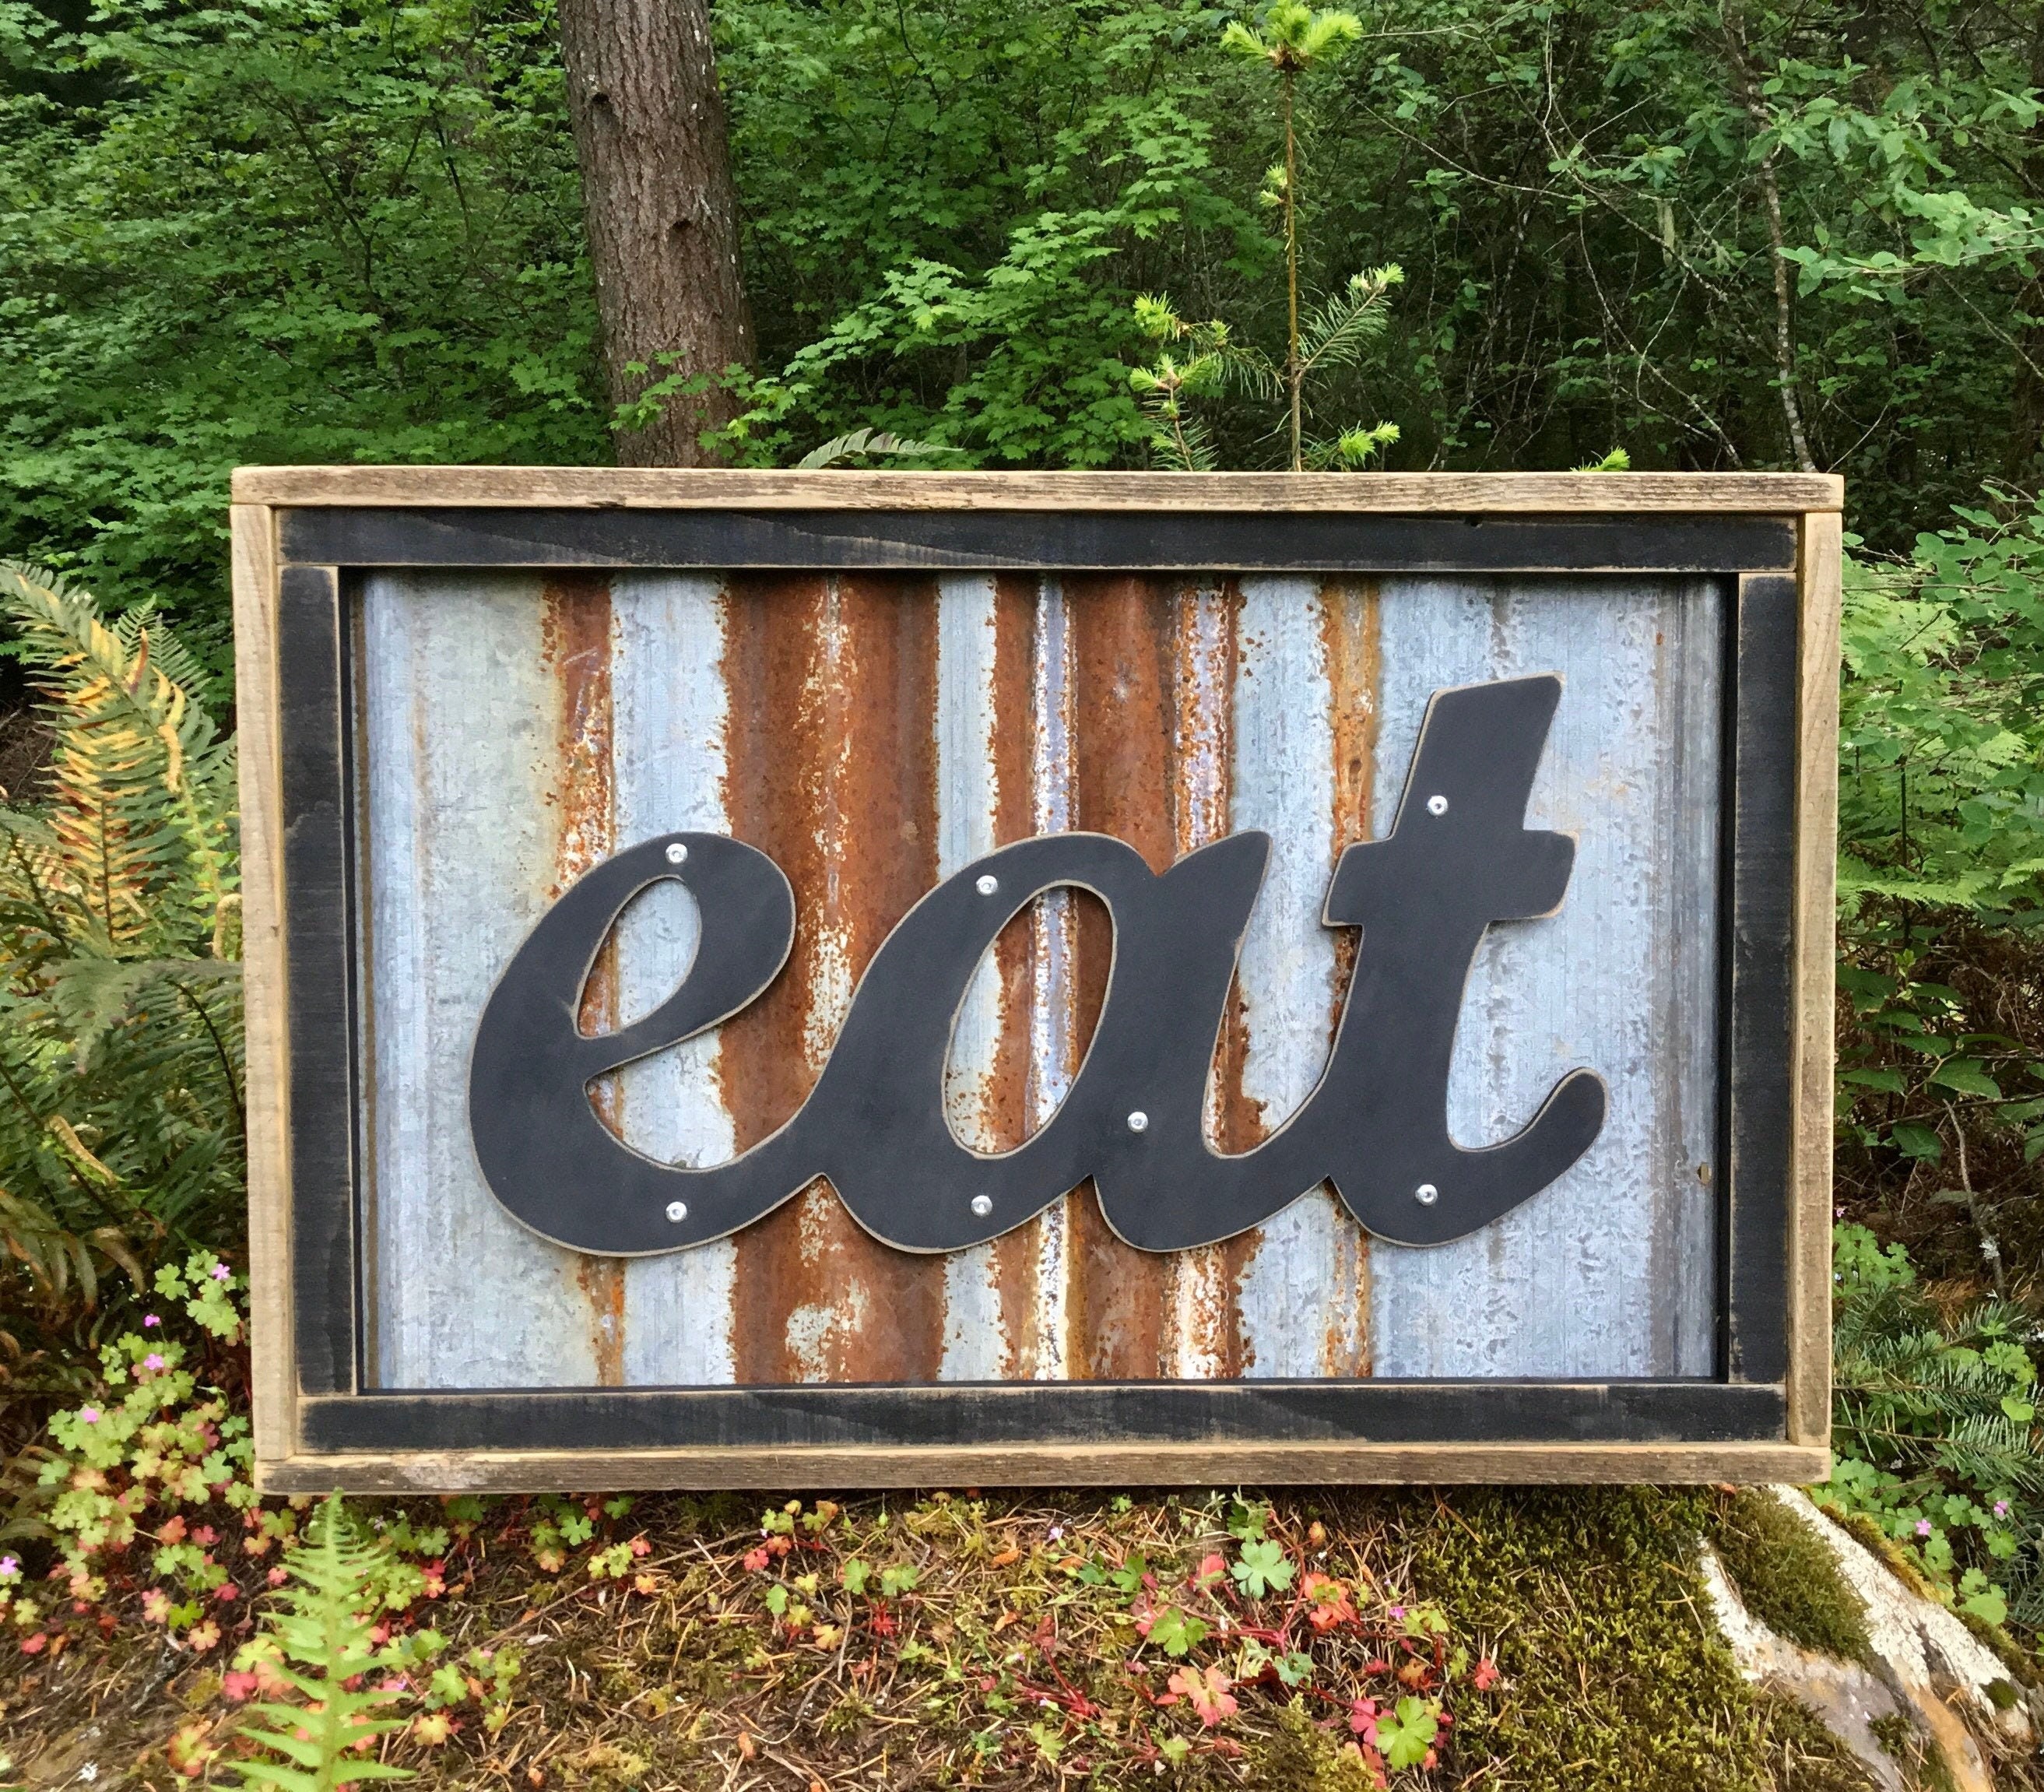 eat sign, large EAT sign, kitchen wall decor, kitchen eat sign, fixerupper  style kitchen sign, wooden eat sign, dining room eat wall art